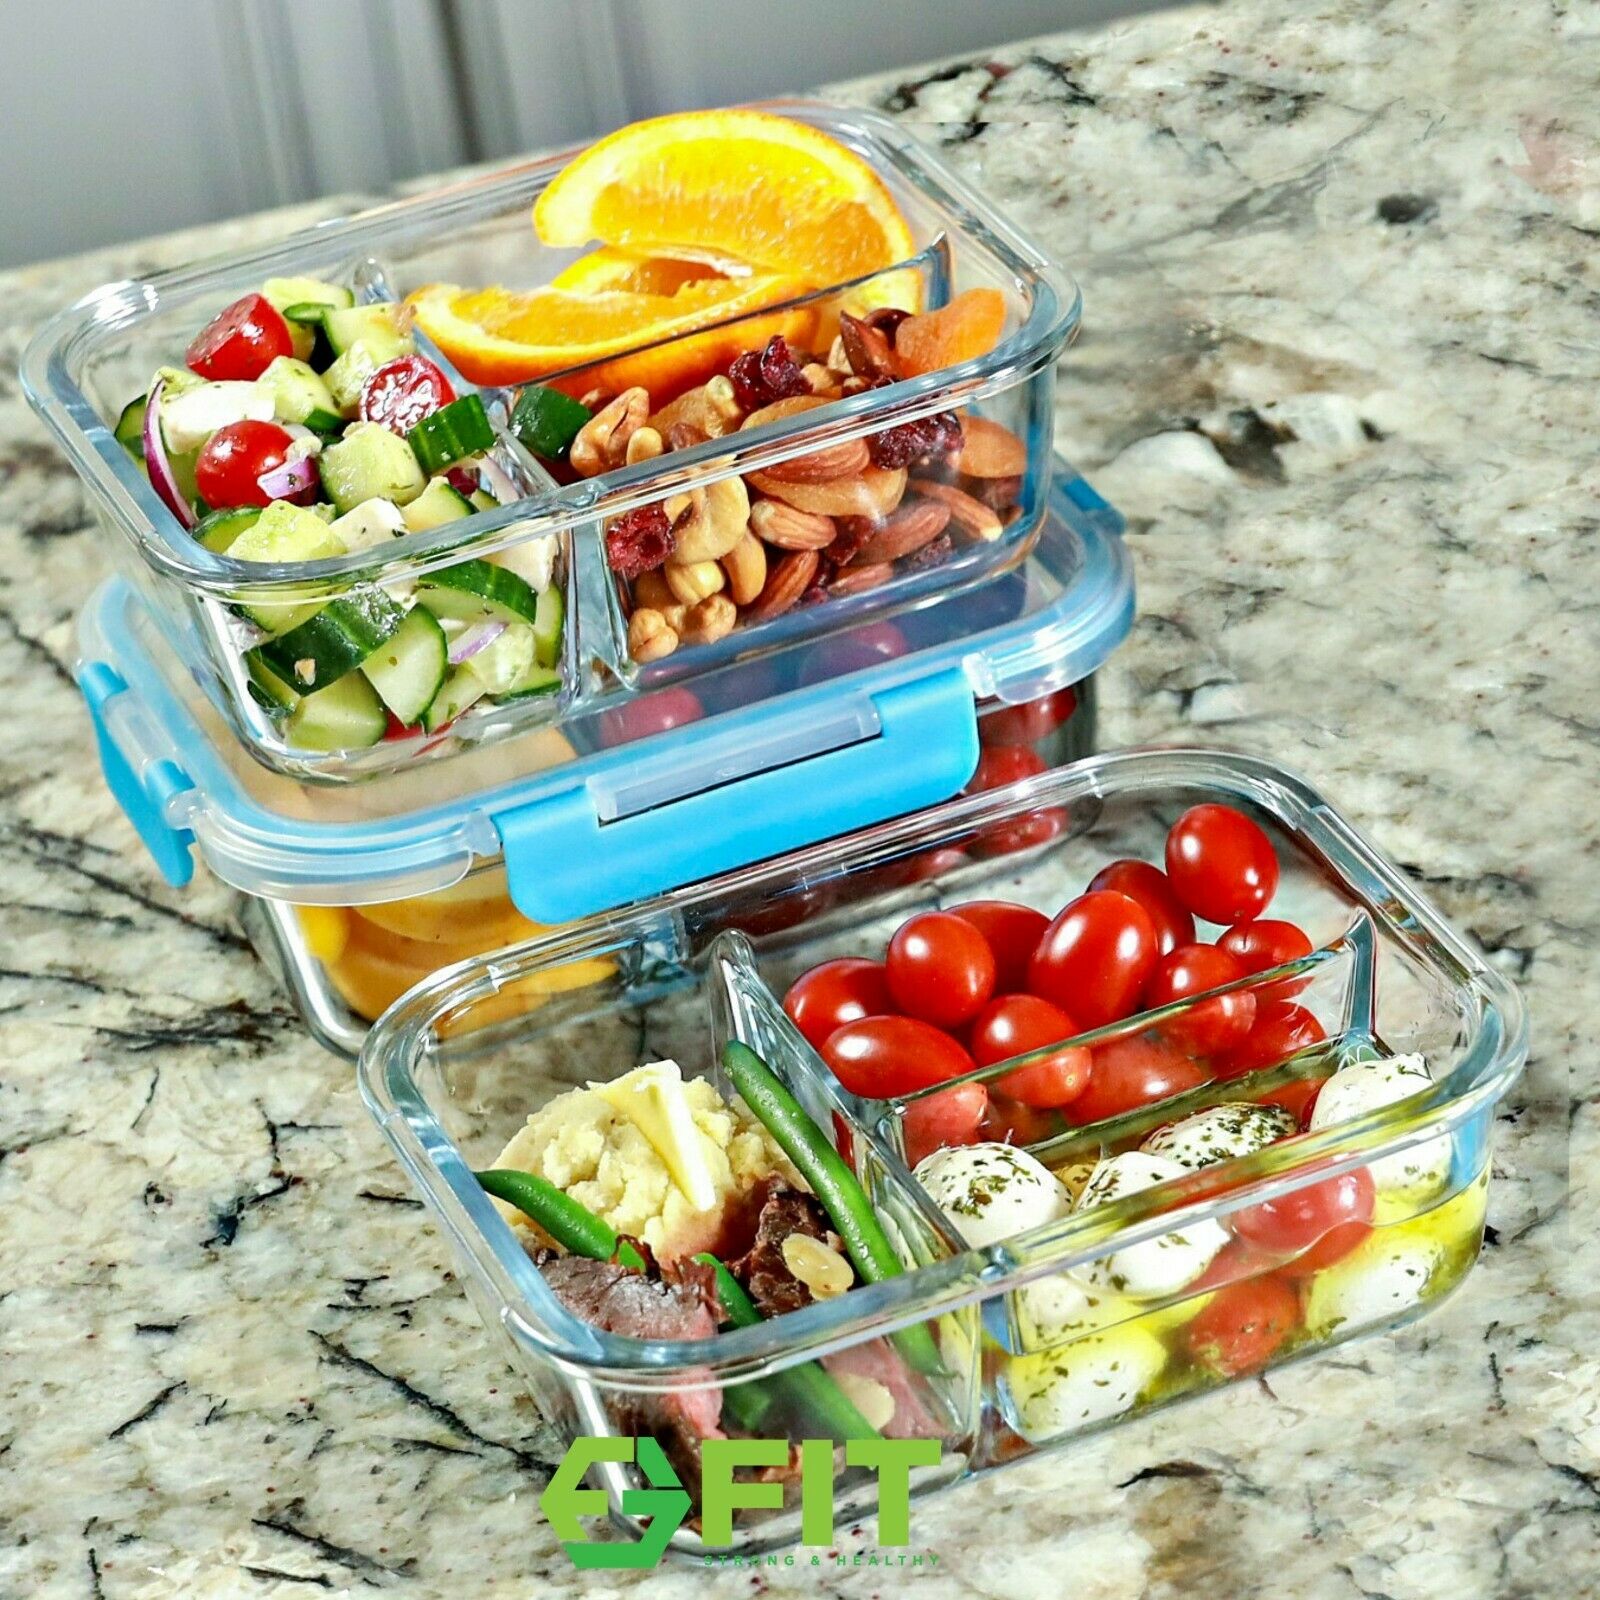 3 Compartment Glass Meal Prep Containers (5682863023060 Pack, 35